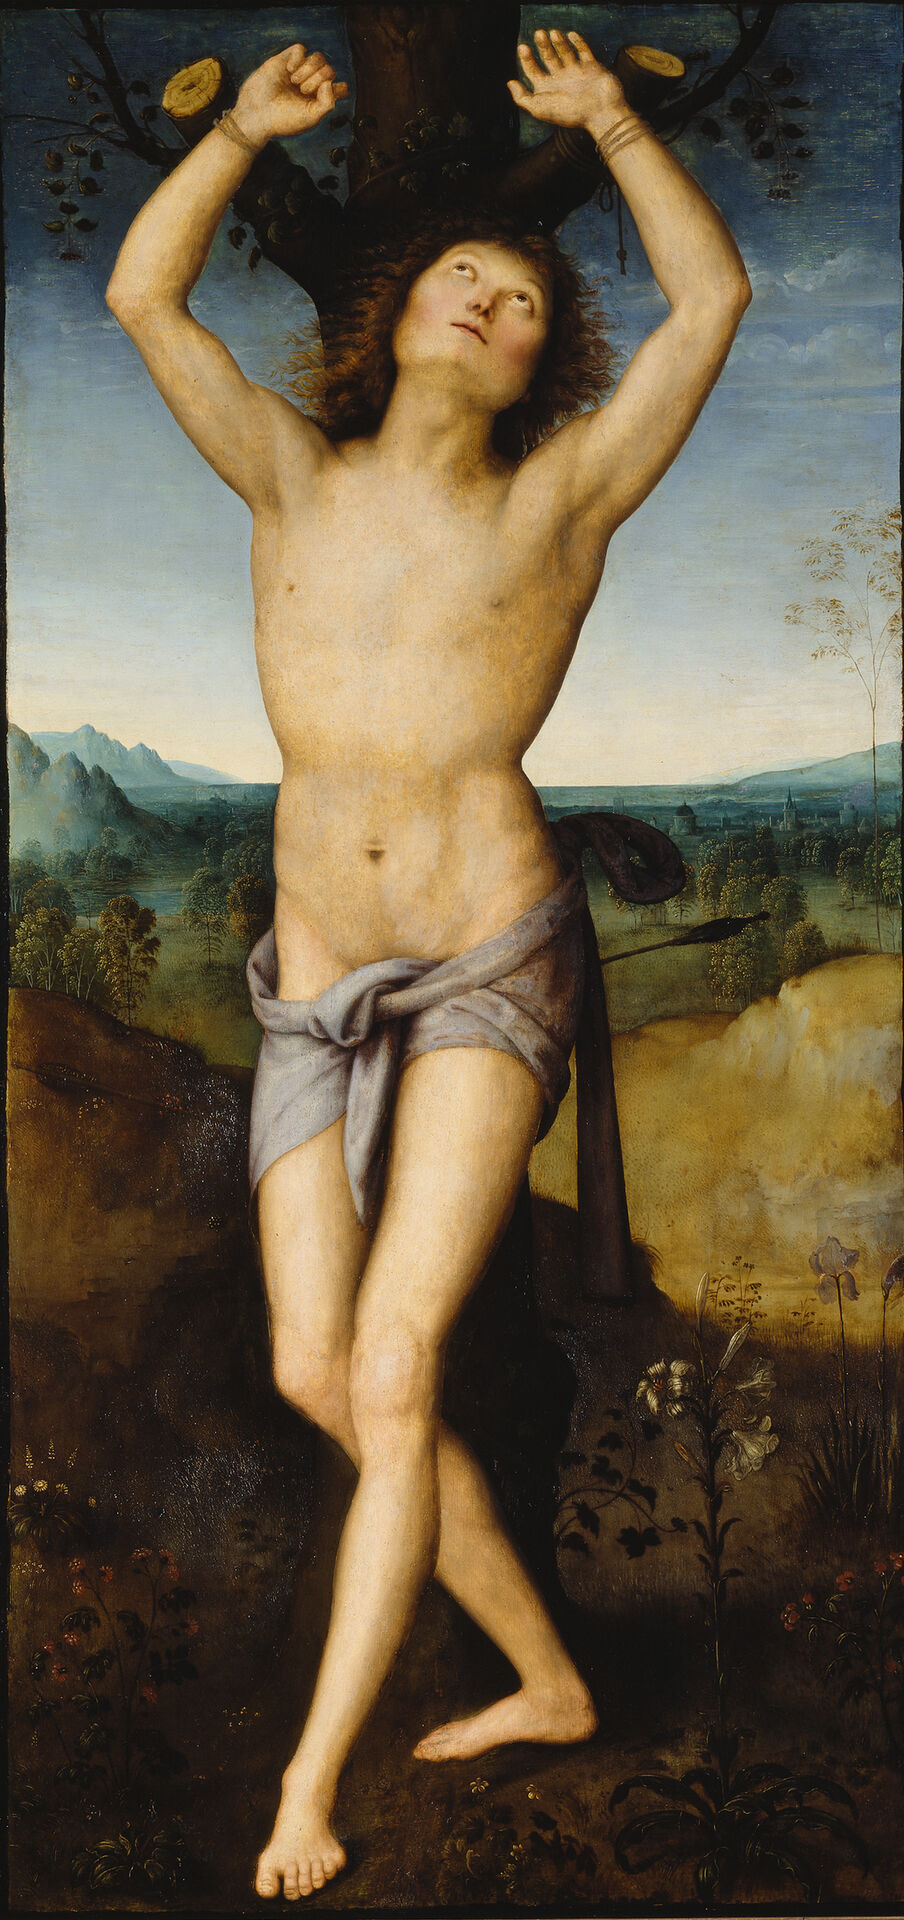 Pietro Perugino, S:t Sebastian, painted in 1485, approximately, oil on canvas (transferred from wooden panel). Nationalmuseum.